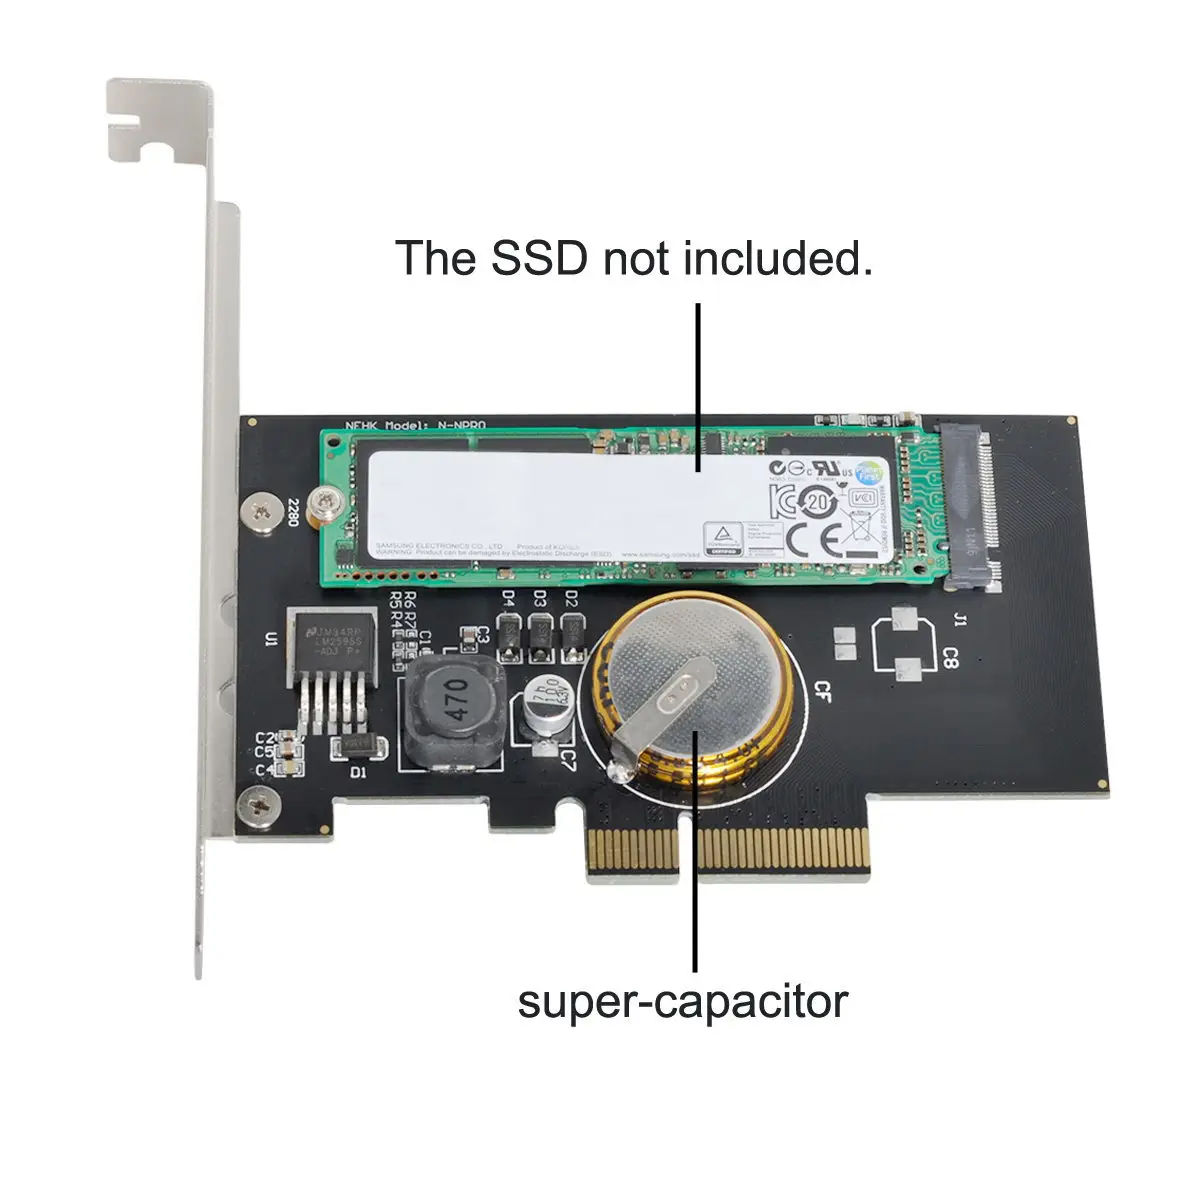 

PCI-E 3.0 x4 to M.2 NGFF M Key SSD Nvme Card Adapter PCI Express with Power Failure Protection 4.0F Super Capacitor